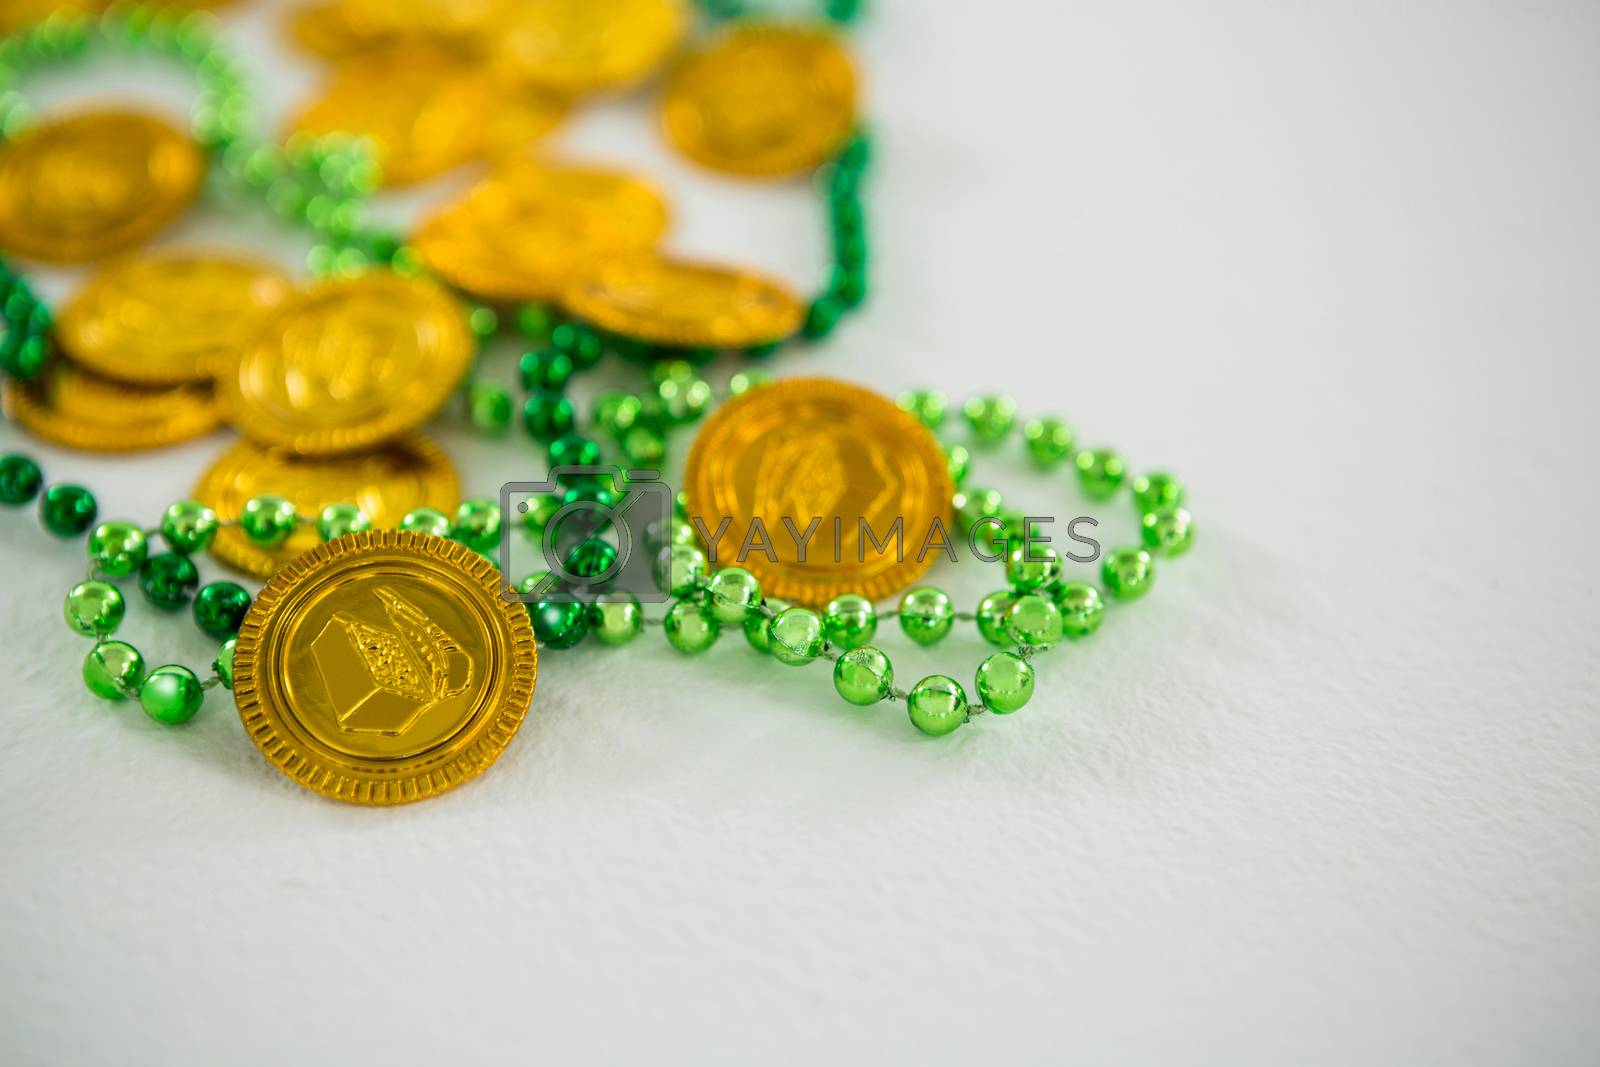 Royalty free image of St Patricks Day gold chocolate coin and beads by Wavebreakmedia